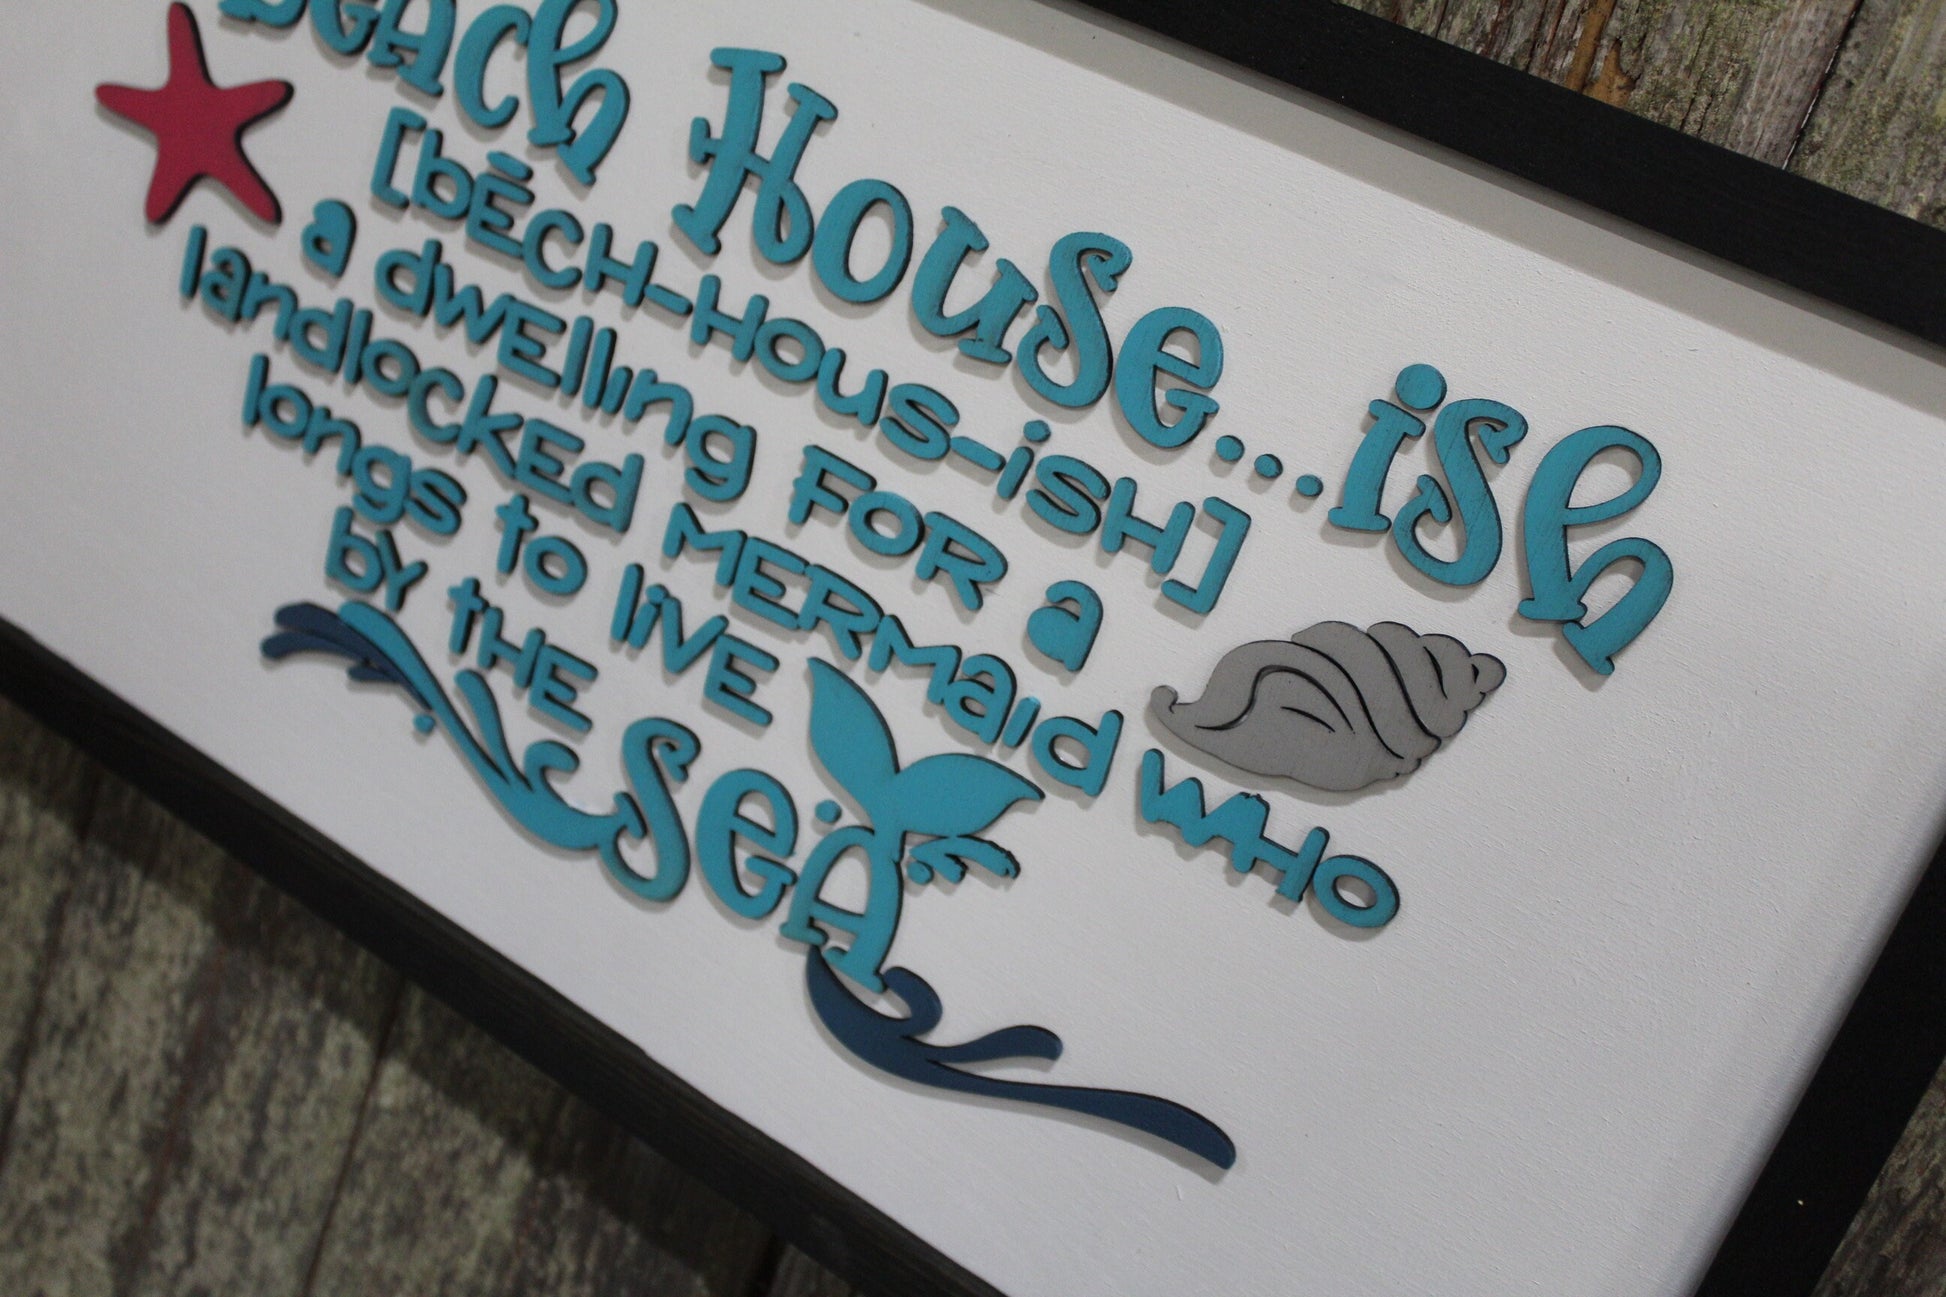 Beach House - Ish Wood Sign Ocean Water Sea Dwelling for a Landlocked Mermaid 3D Raised Text Wall Hanging Decor Rustic Longs for the Sea